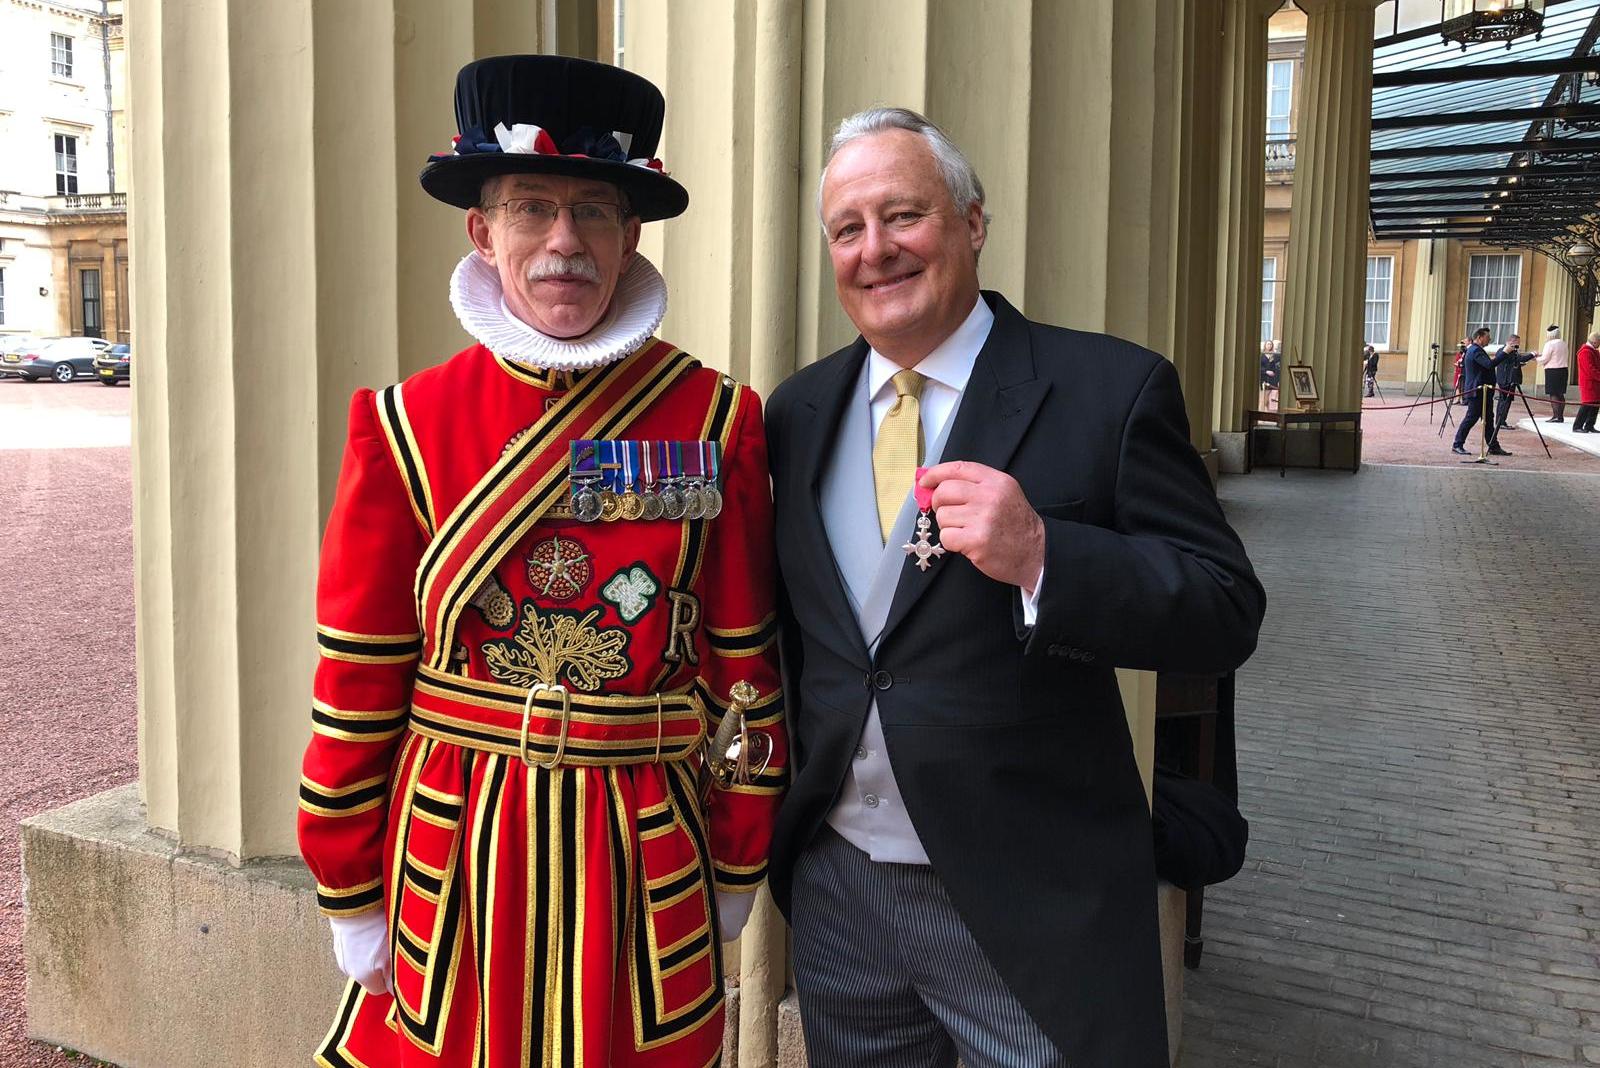 Yeoman swaps shift to help York's Rose Theatre boss celebrate receiving MBE